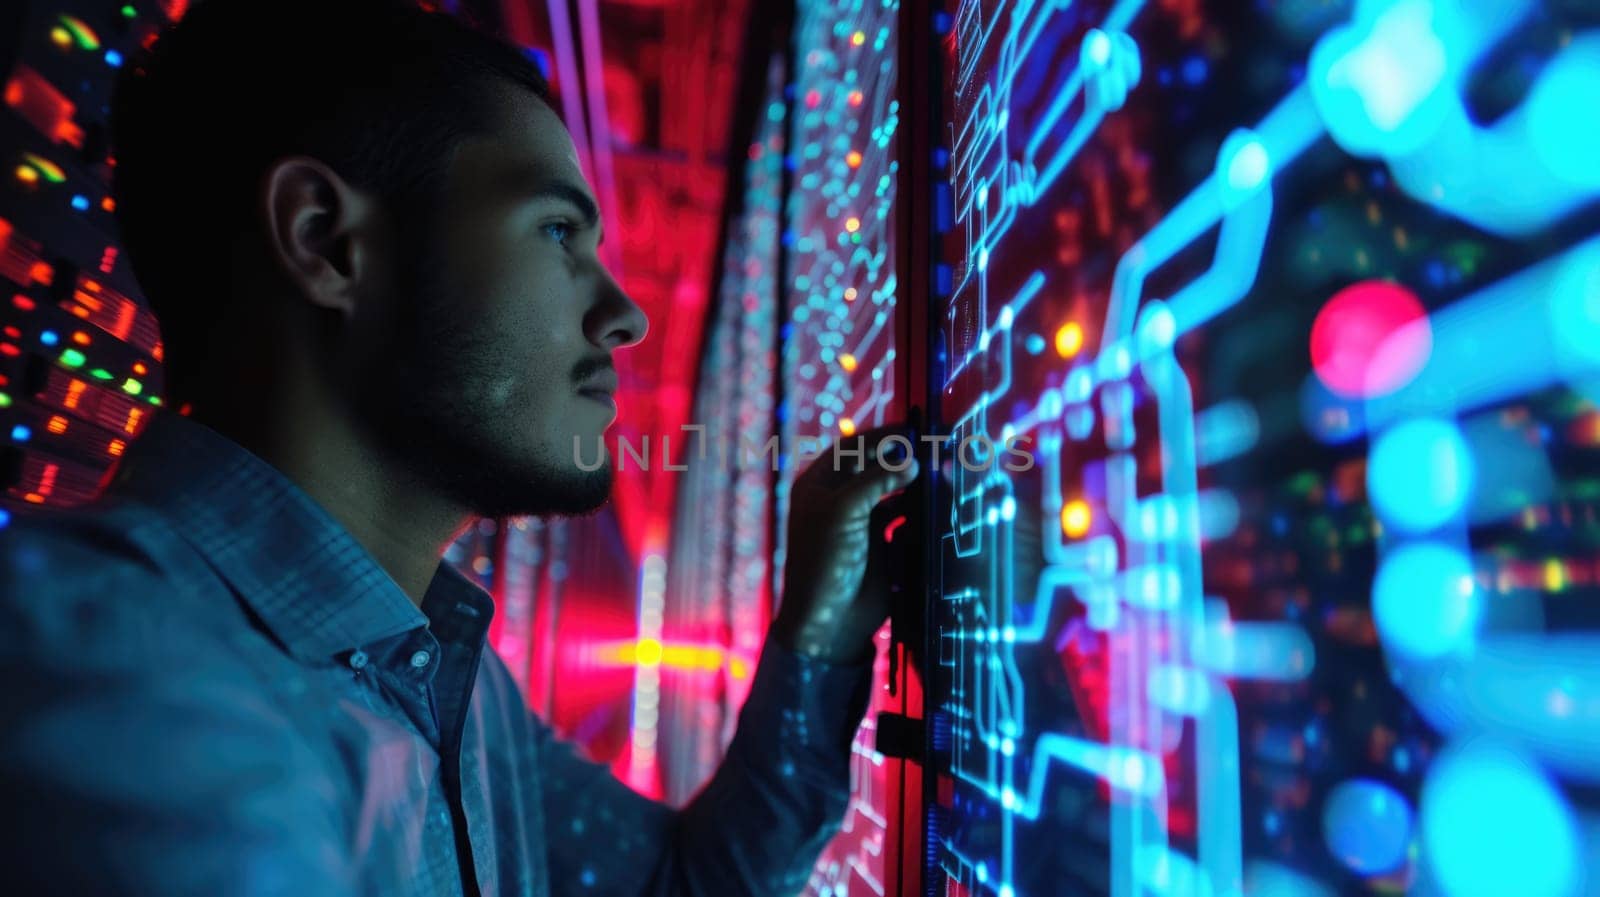 A data analyst closely examines complex data visualizations on multiple monitors, reflecting the analytical process in big data. AIG41